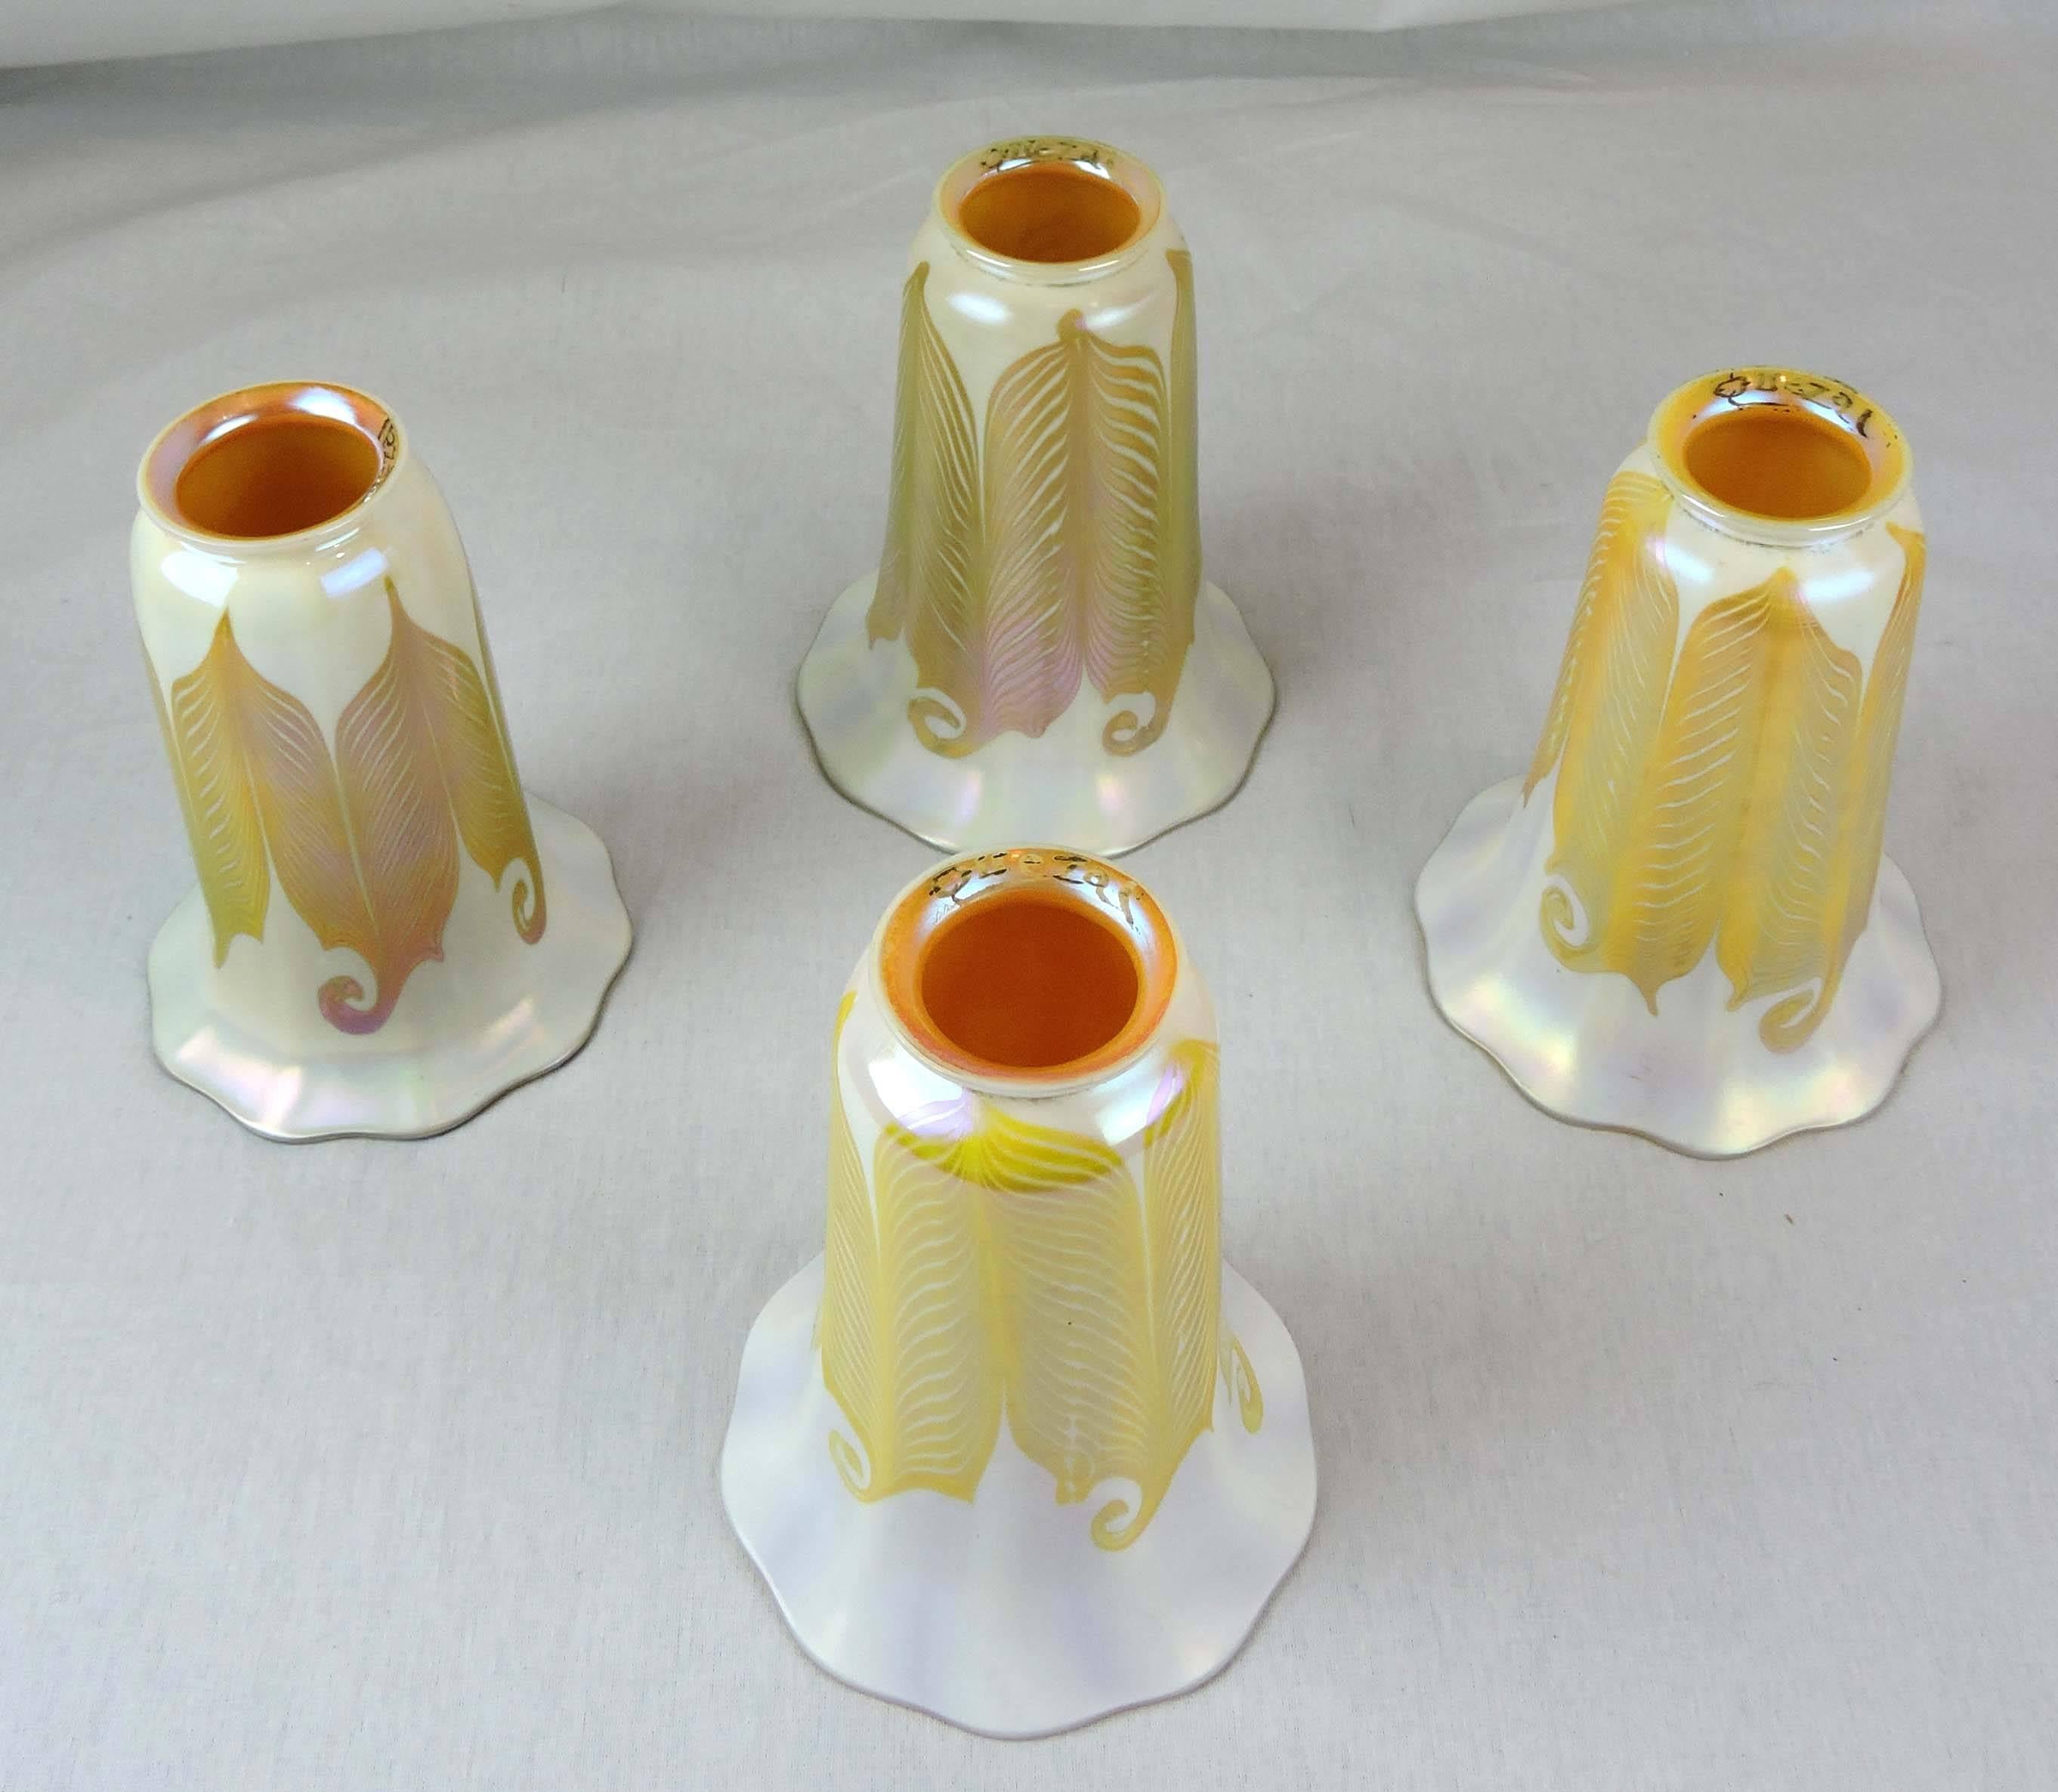 This is a set of four, matching American Art Nouveau art glass shades by The Quezal Art Glass and Decorating Co, which operated in New York City between 1902-1925.

The exterior of each flower-shaped, fluted, columnar shade is decorated with a